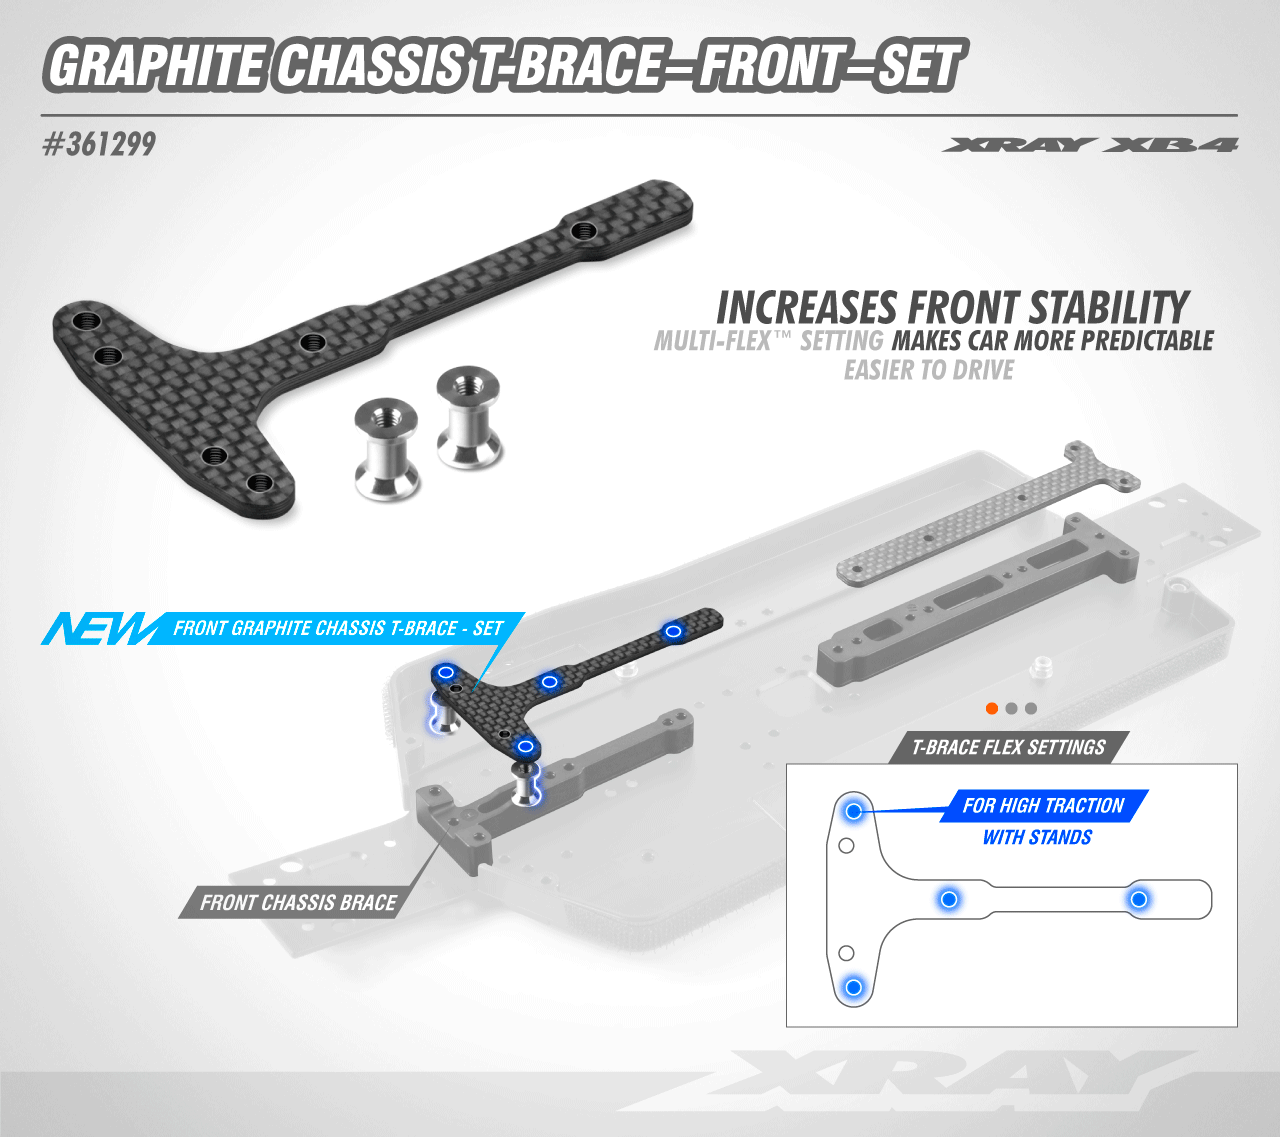 GRAPHITE CHASSIS T-BRACE - FRONT - SET